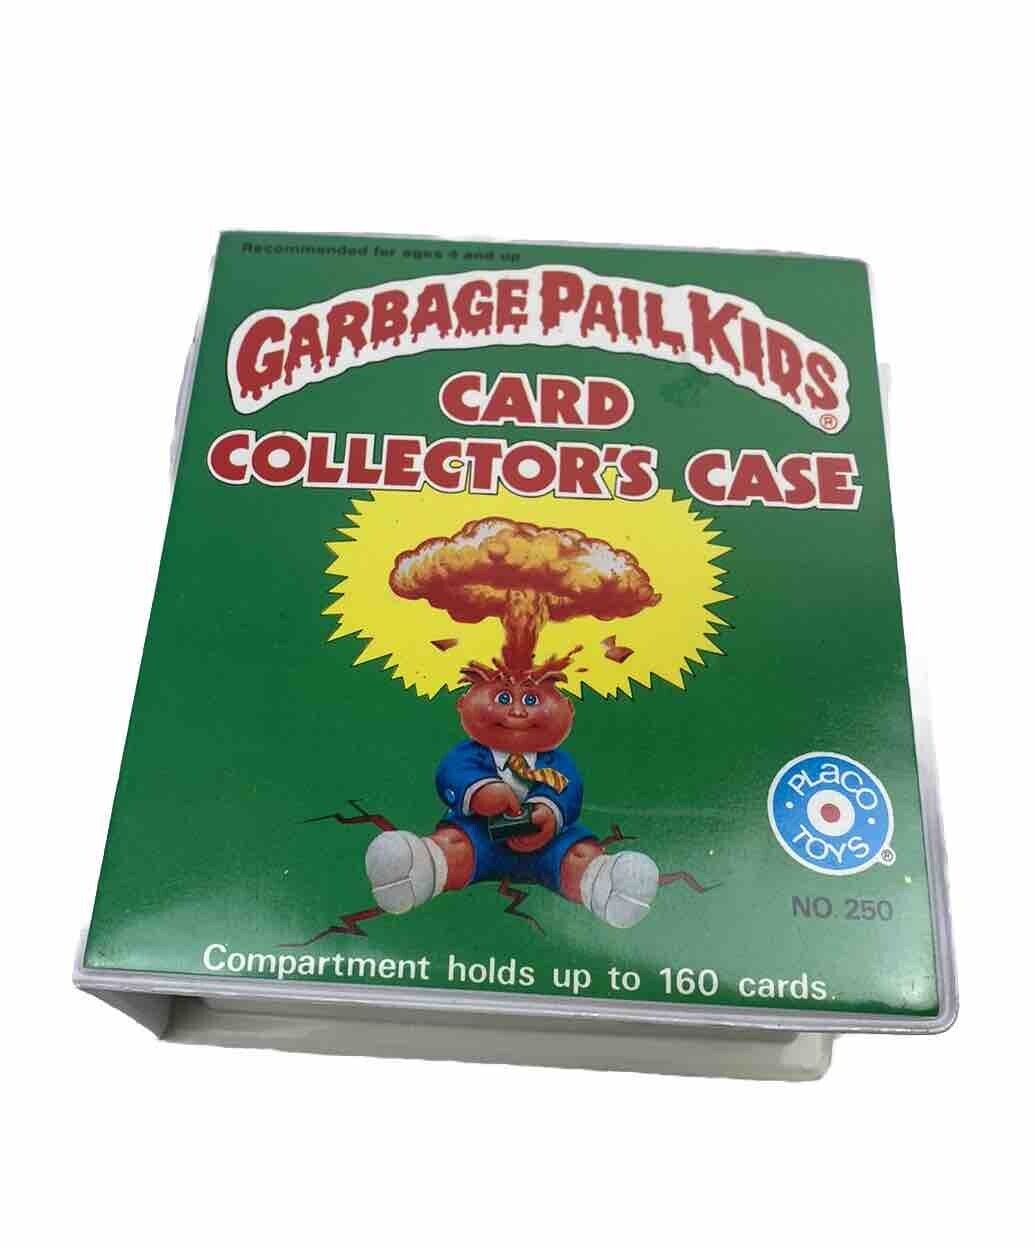 1986 Vintage Placo Toys Garbage Pail Kids Card Collector’s Case No. 250